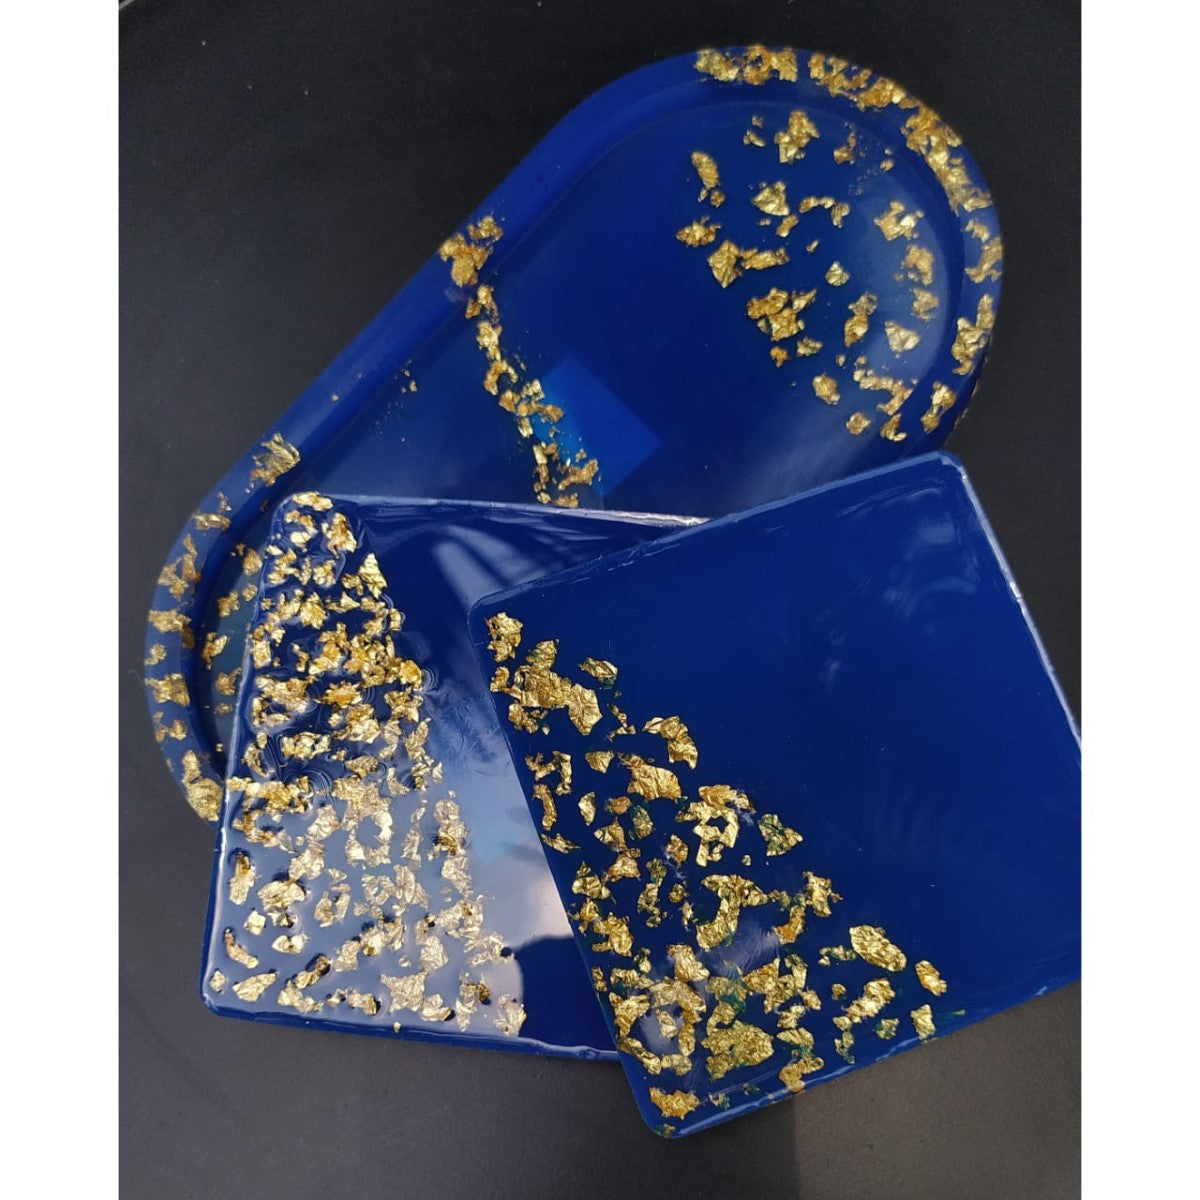 Golds & Blues Coaster Set with Tray